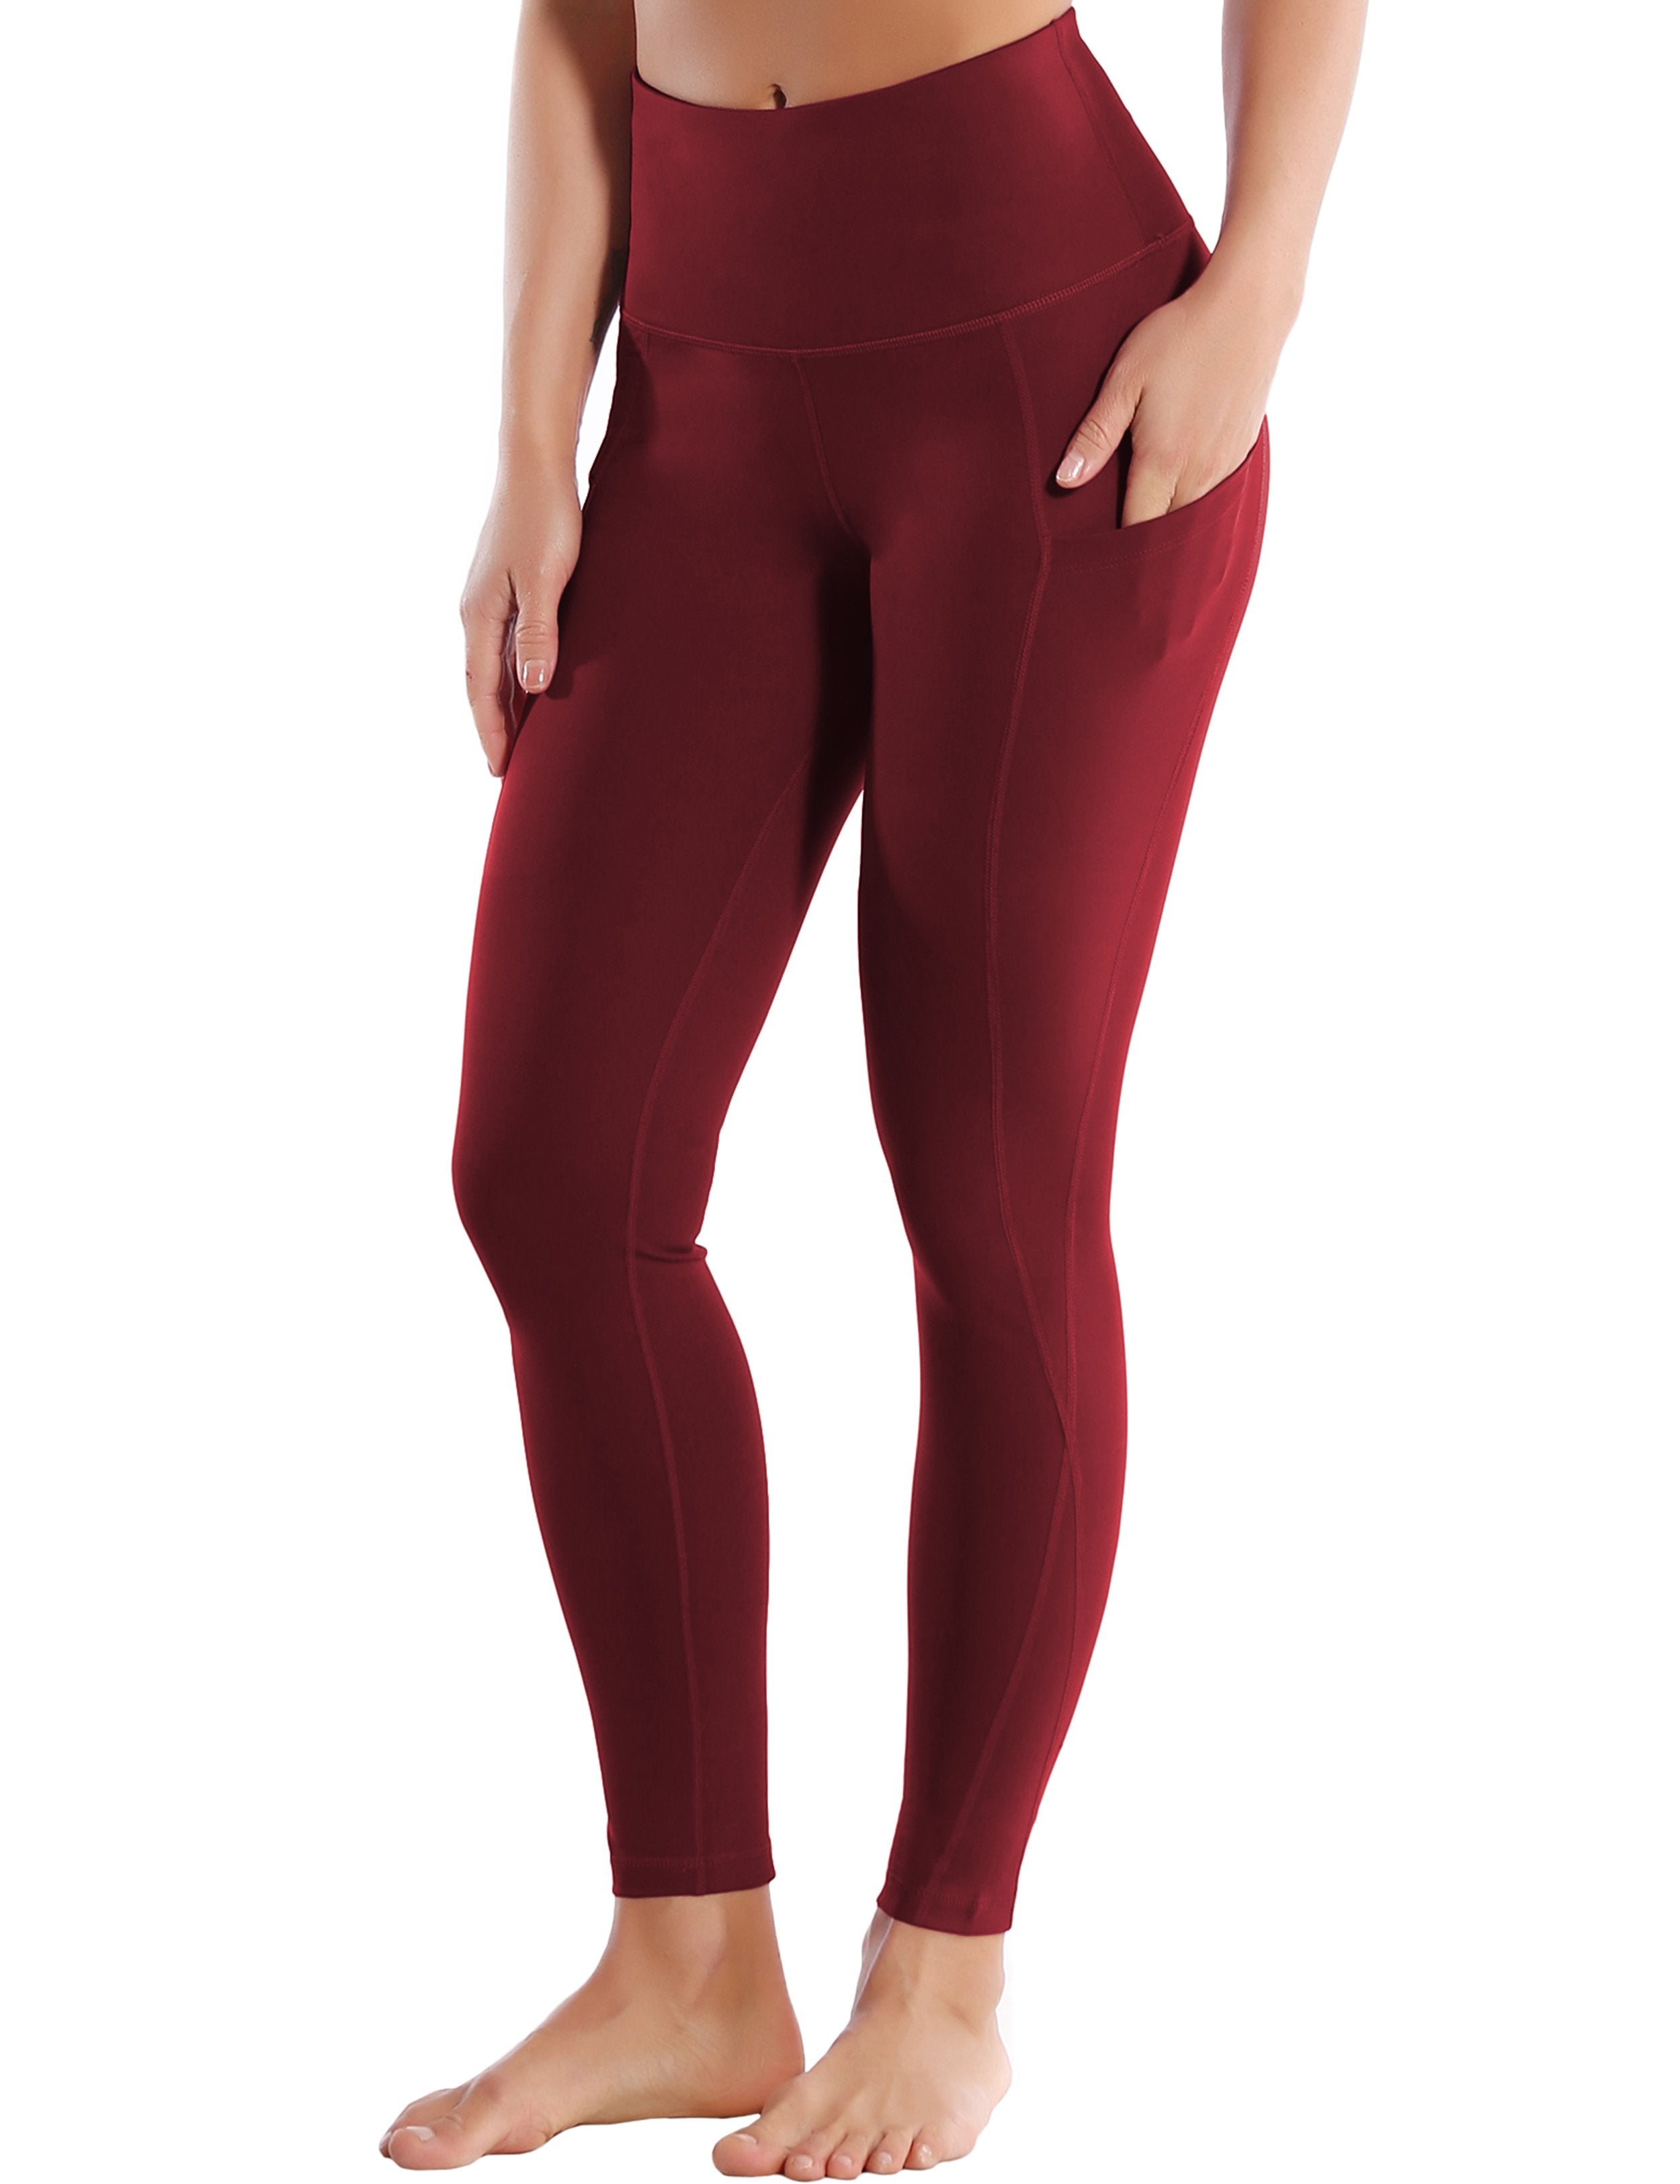 High Waist Side Pockets Jogging Pants cherryred 75% Nylon, 25% Spandex Fabric doesn't attract lint easily 4-way stretch No see-through Moisture-wicking Tummy control Inner pocket